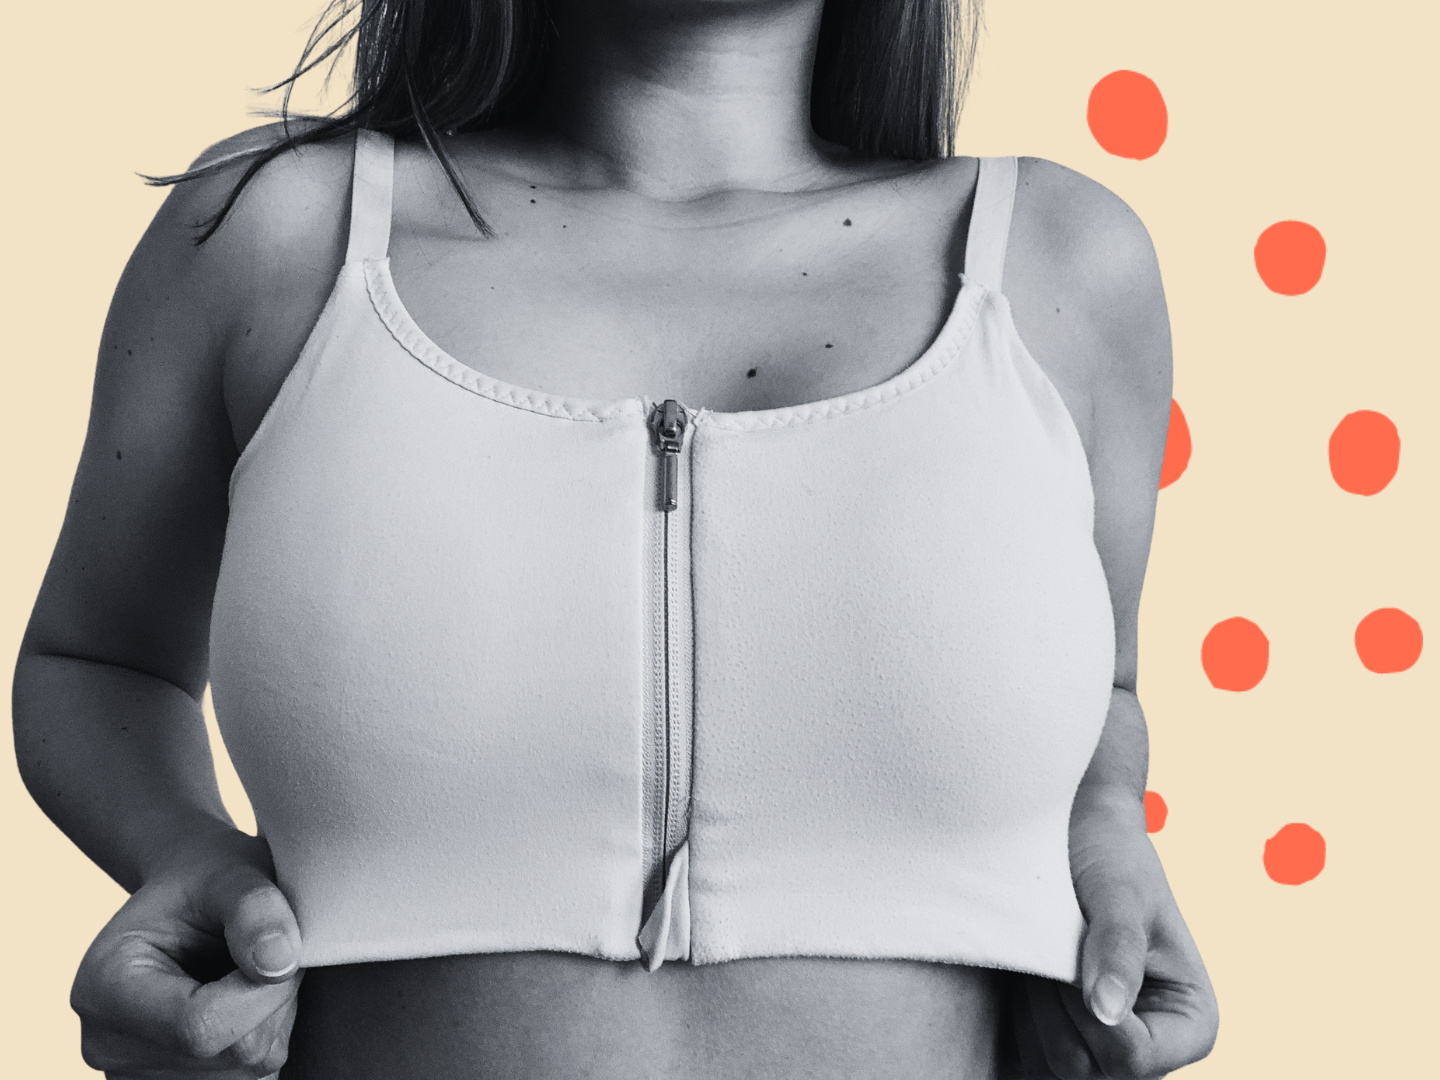 2 techniques for overcoming Iron Bra syndrome, The Mastectomy Guide was  live.